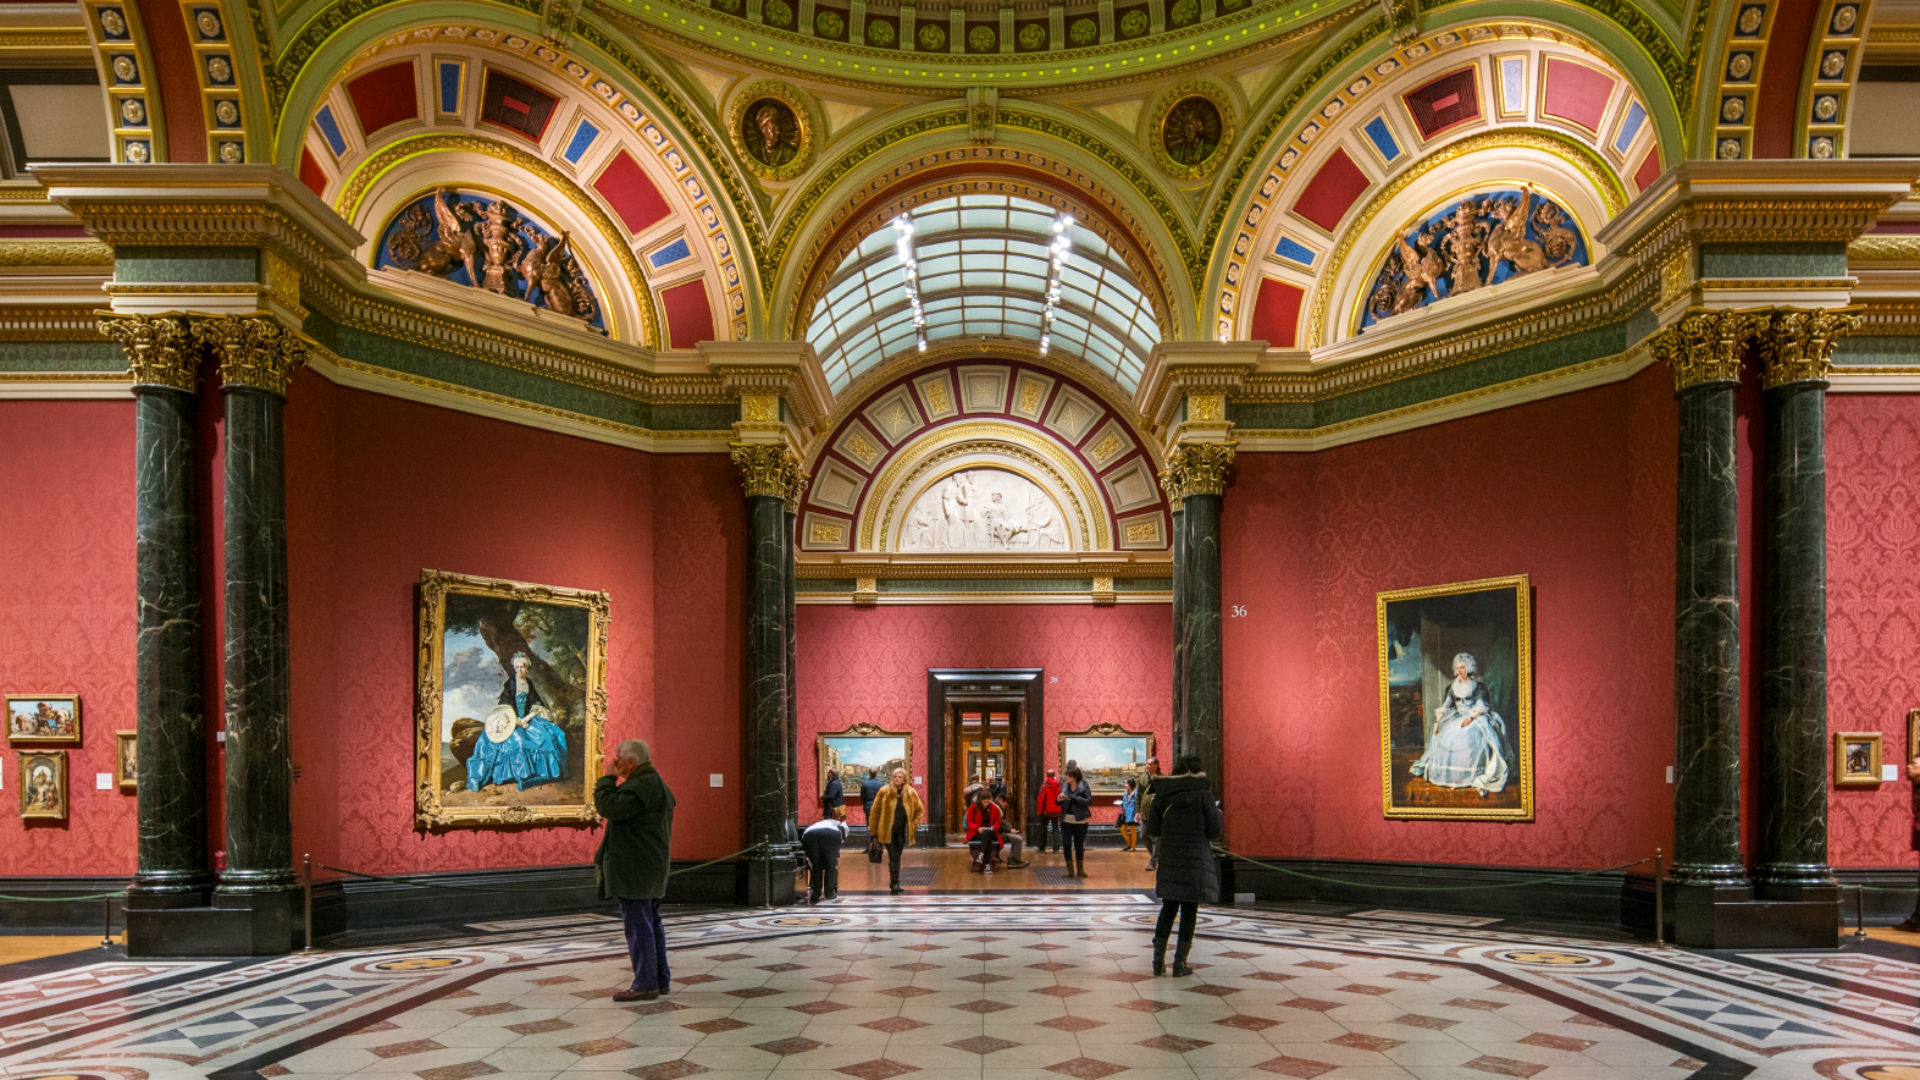 Two people looking at paintings in the red-painted halls of the National Gallery.